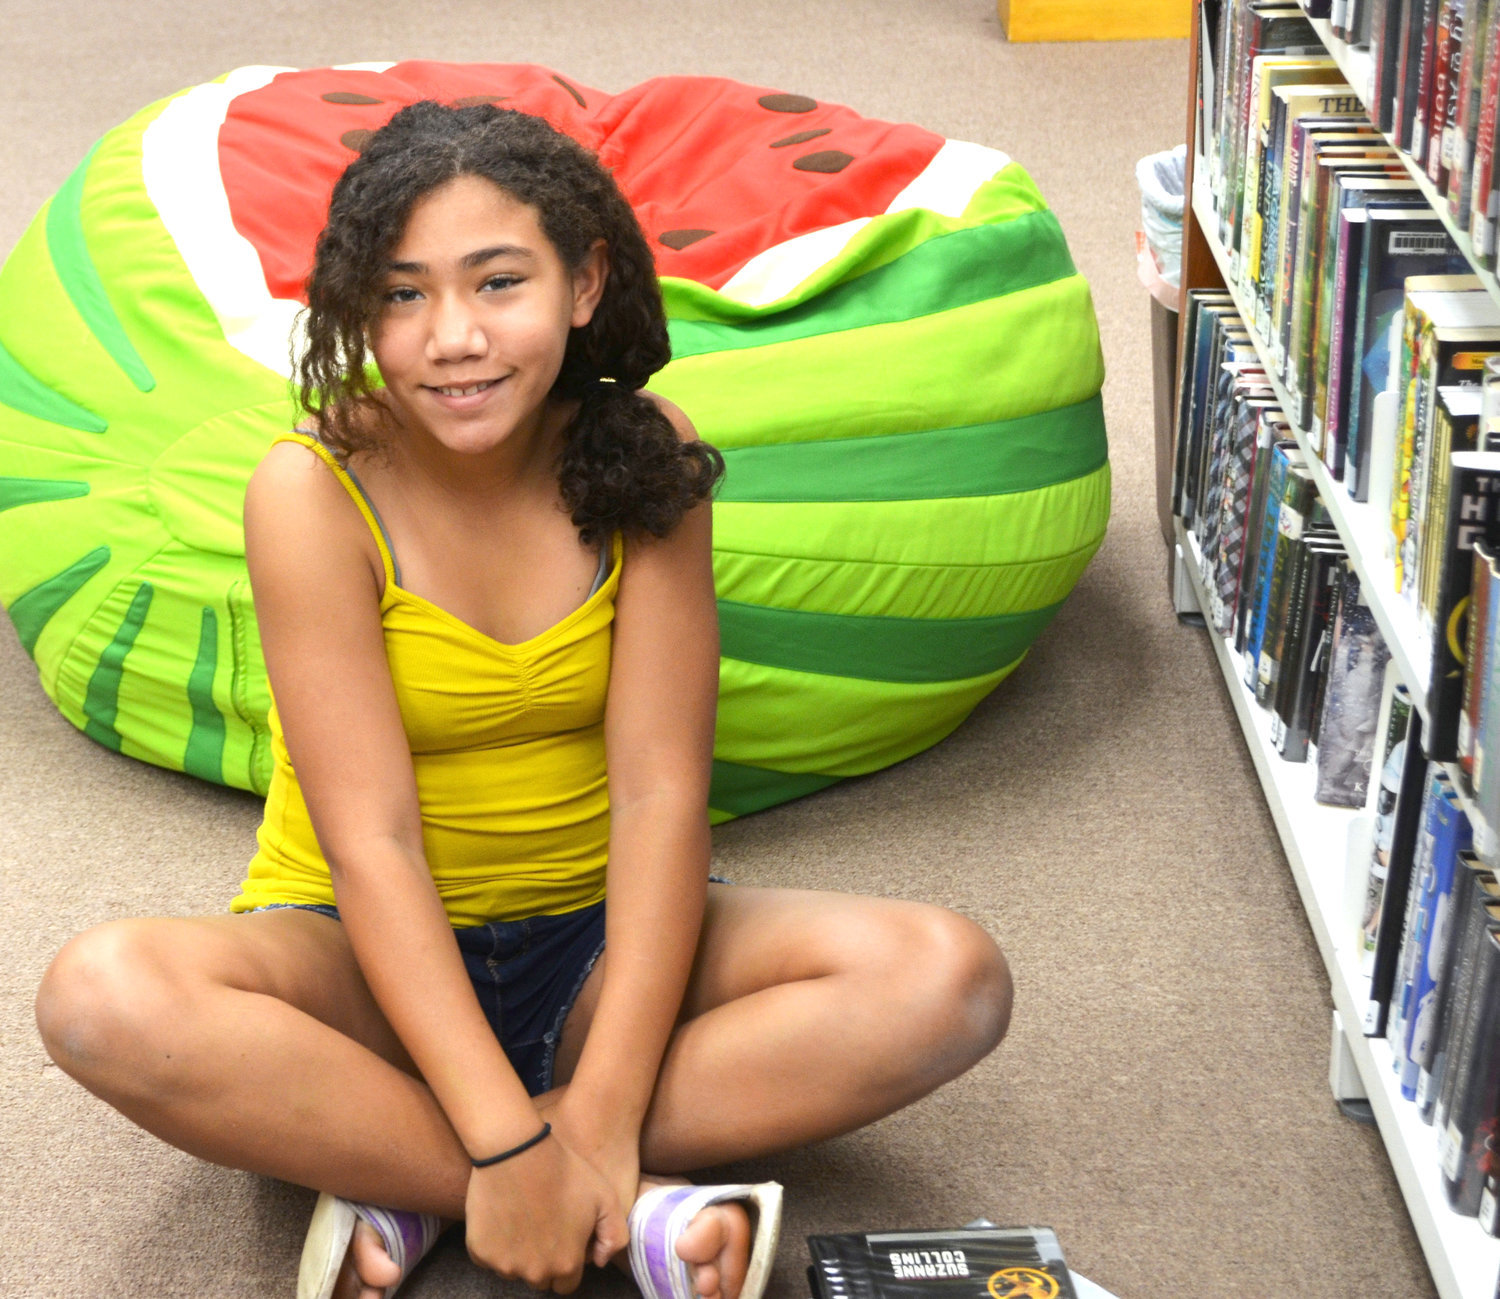 Allie Neagle of Mineola relaxes at the library’s area for teenage readers. The watermelon beanbag chair behind her is one of the many new additions to the library. (Monitor photo by Hank Murphy)